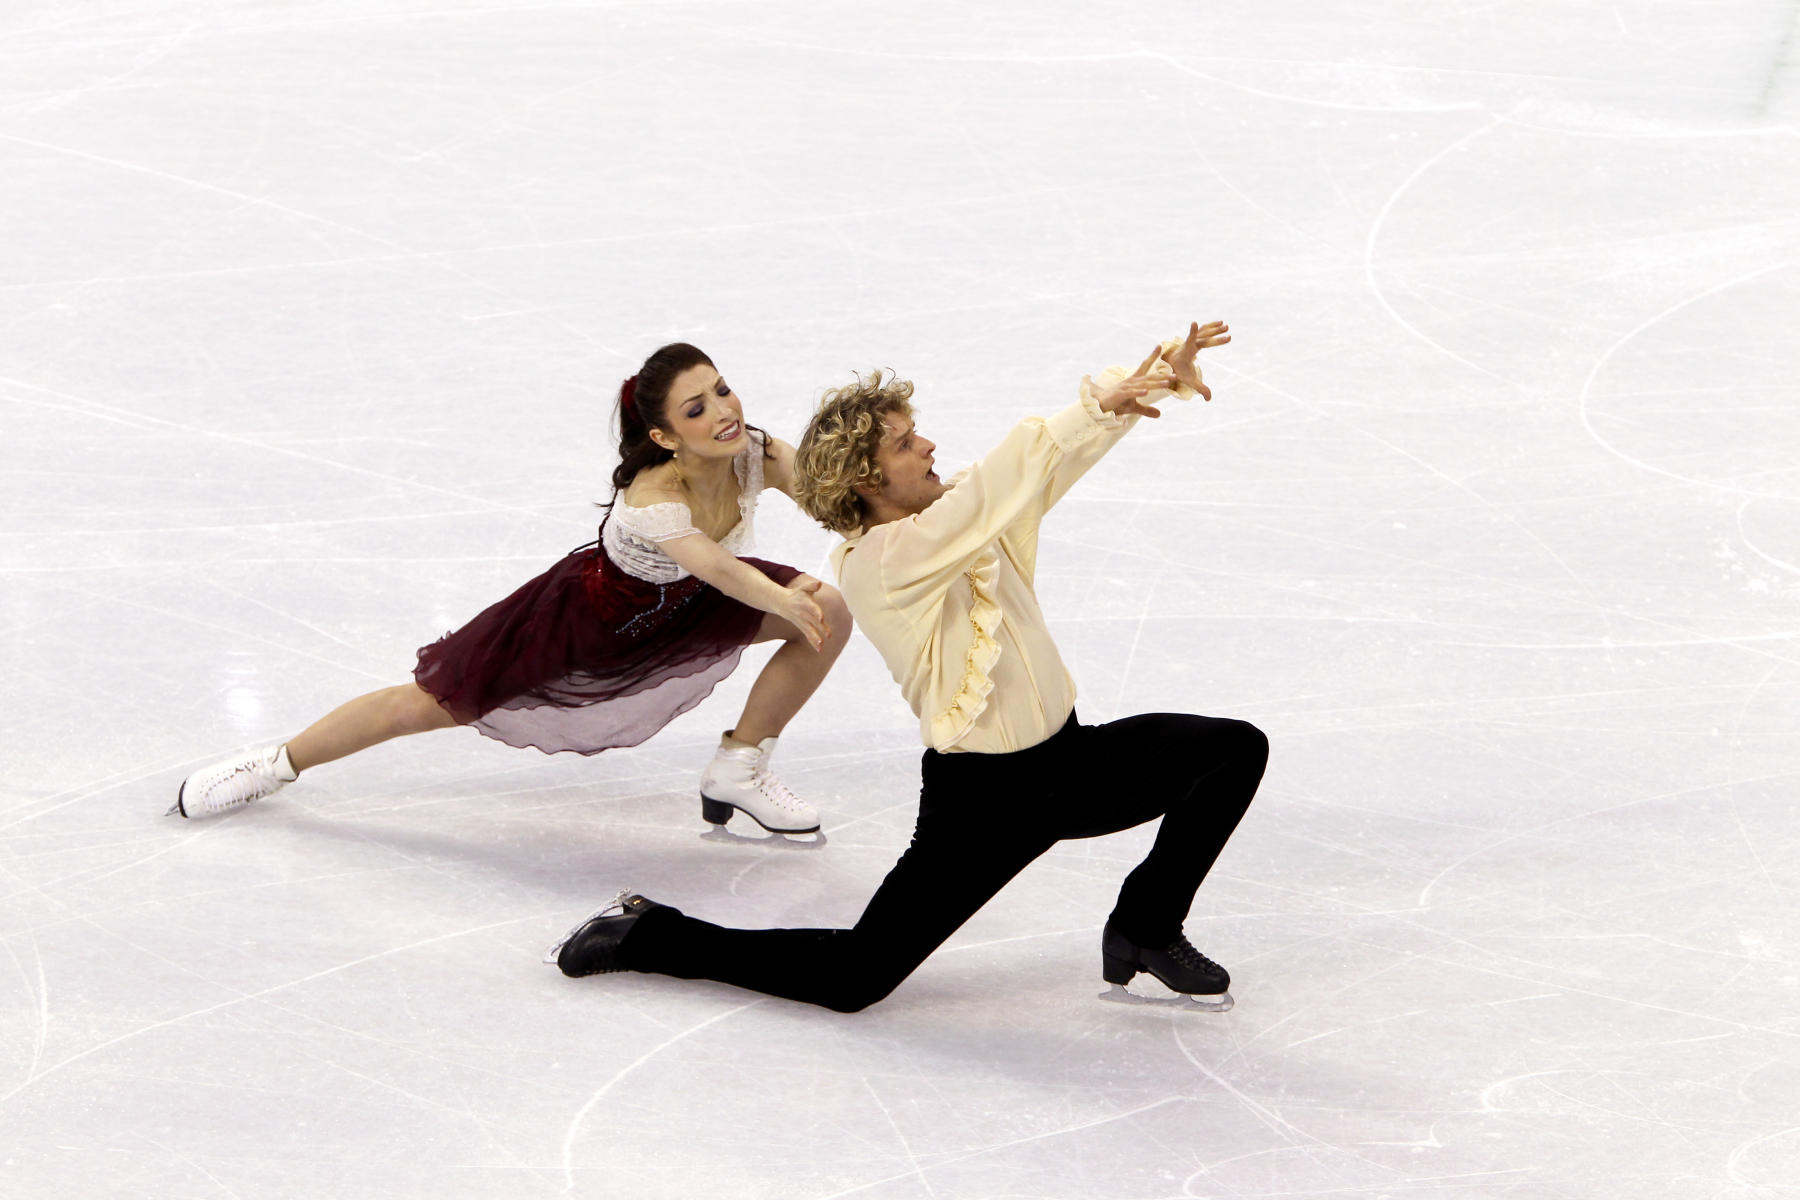 Merrill Davis and Charlie White, Ice Dancing : Vancouver Olympics : Photography by Adam Stoltman: Sports Photography, The Arts, Portraiture, Travel, Photojournalism and Fine Art in New York